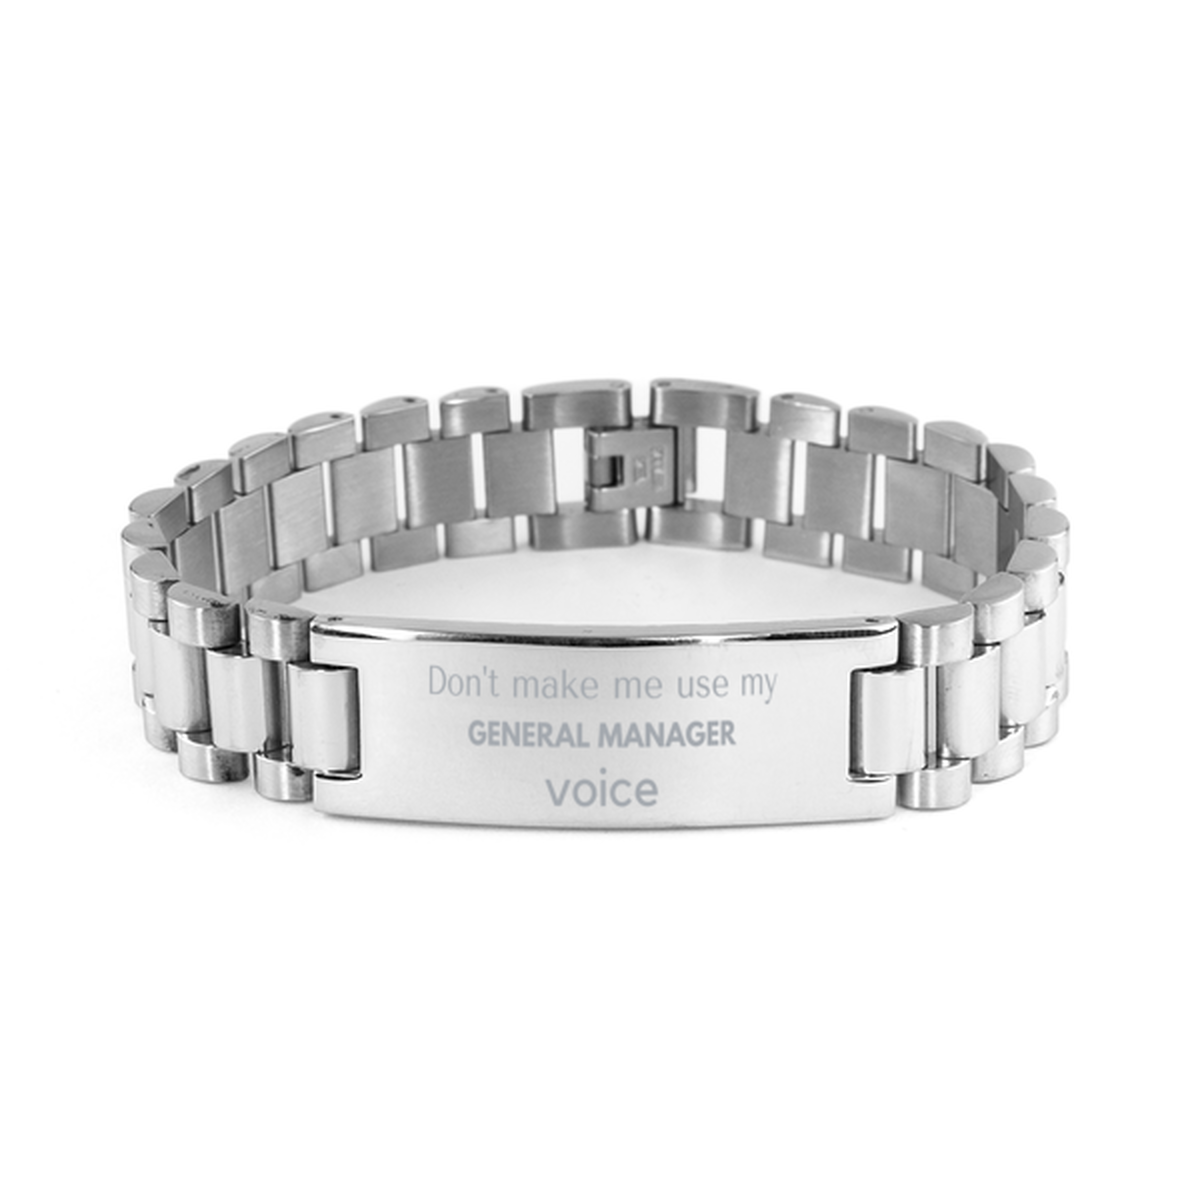 Don't make me use my General Manager voice, Sarcasm General Manager Gifts, Christmas General Manager Ladder Stainless Steel Bracelet Birthday Unique Gifts For General Manager Coworkers, Men, Women, Colleague, Friends